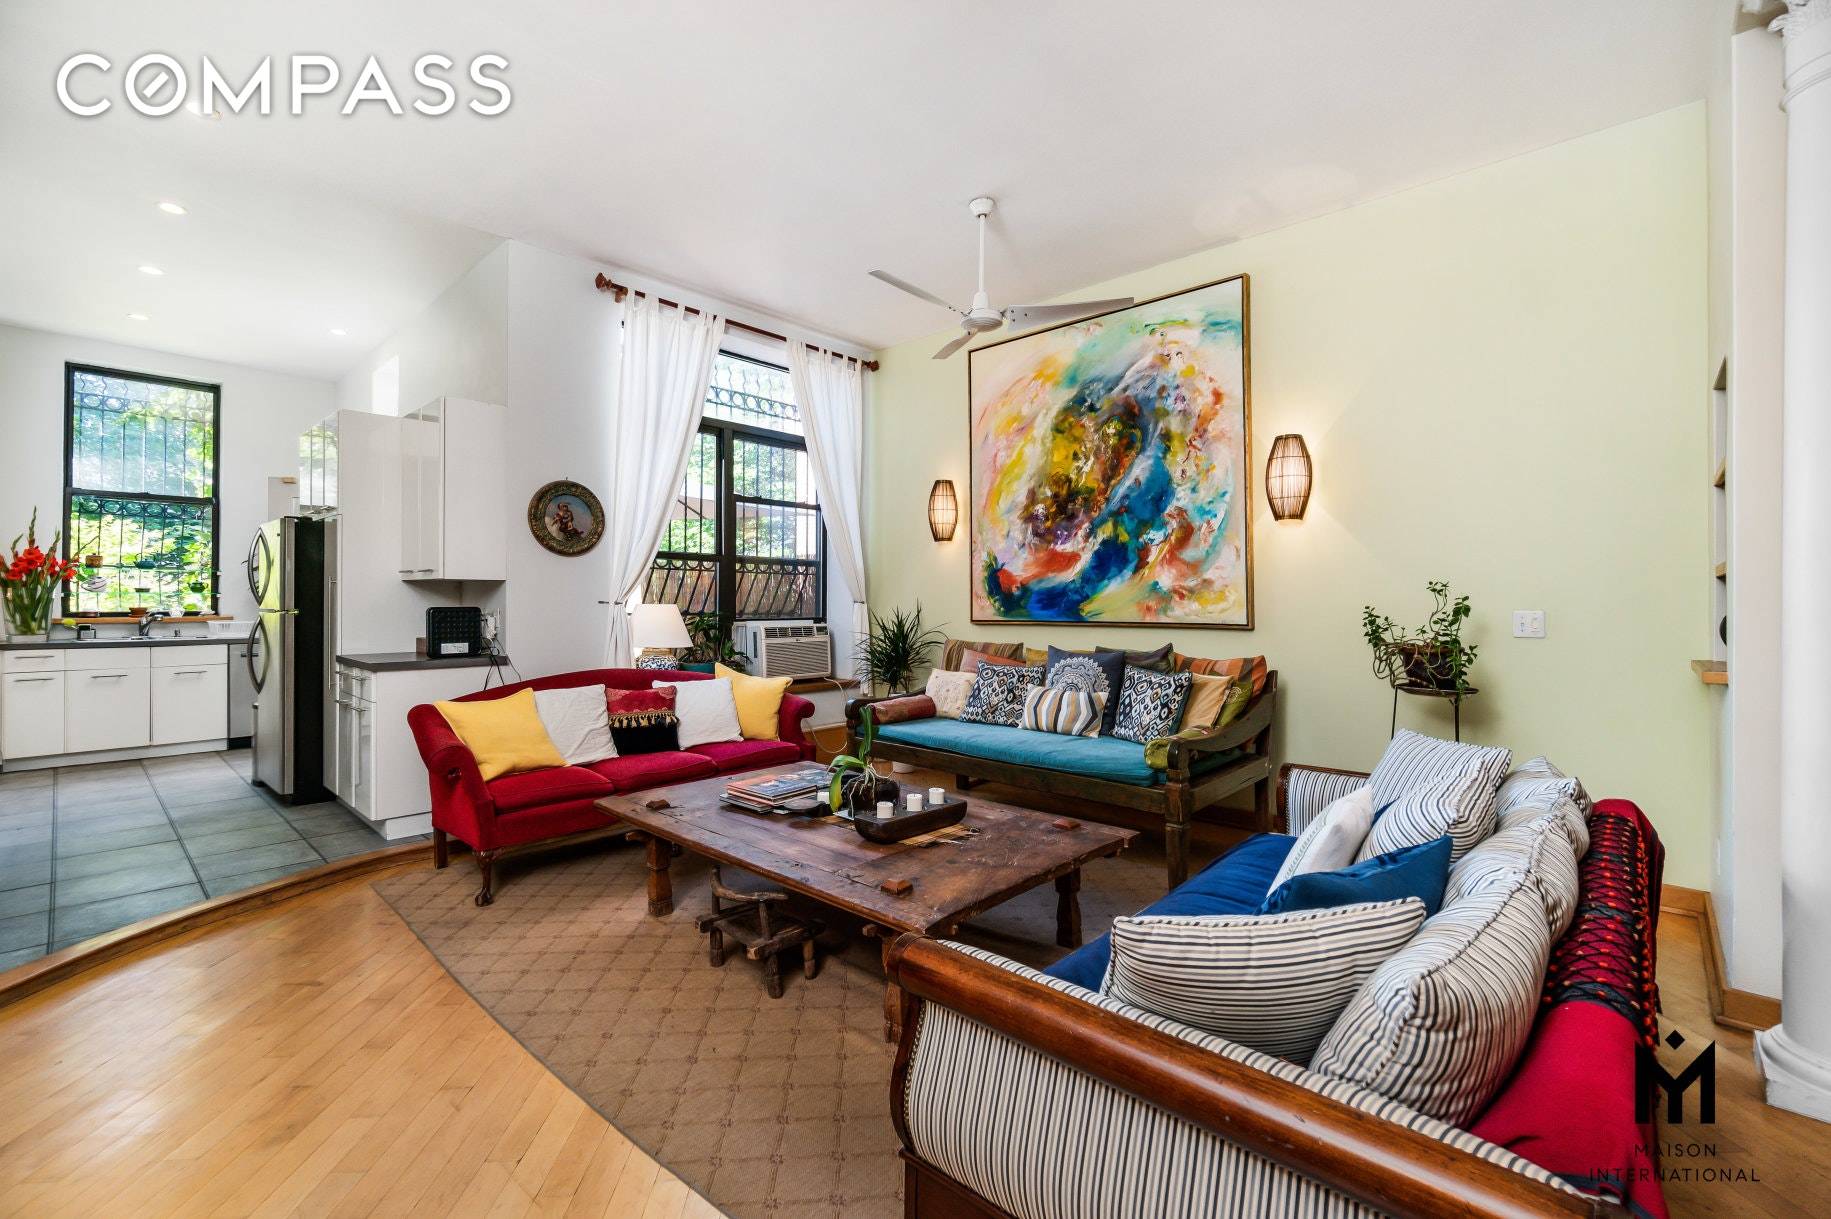 Splendid Brownstone in a 2 family home located in South Harlem with a beautiful terrace and lovely garden right by Central Park.